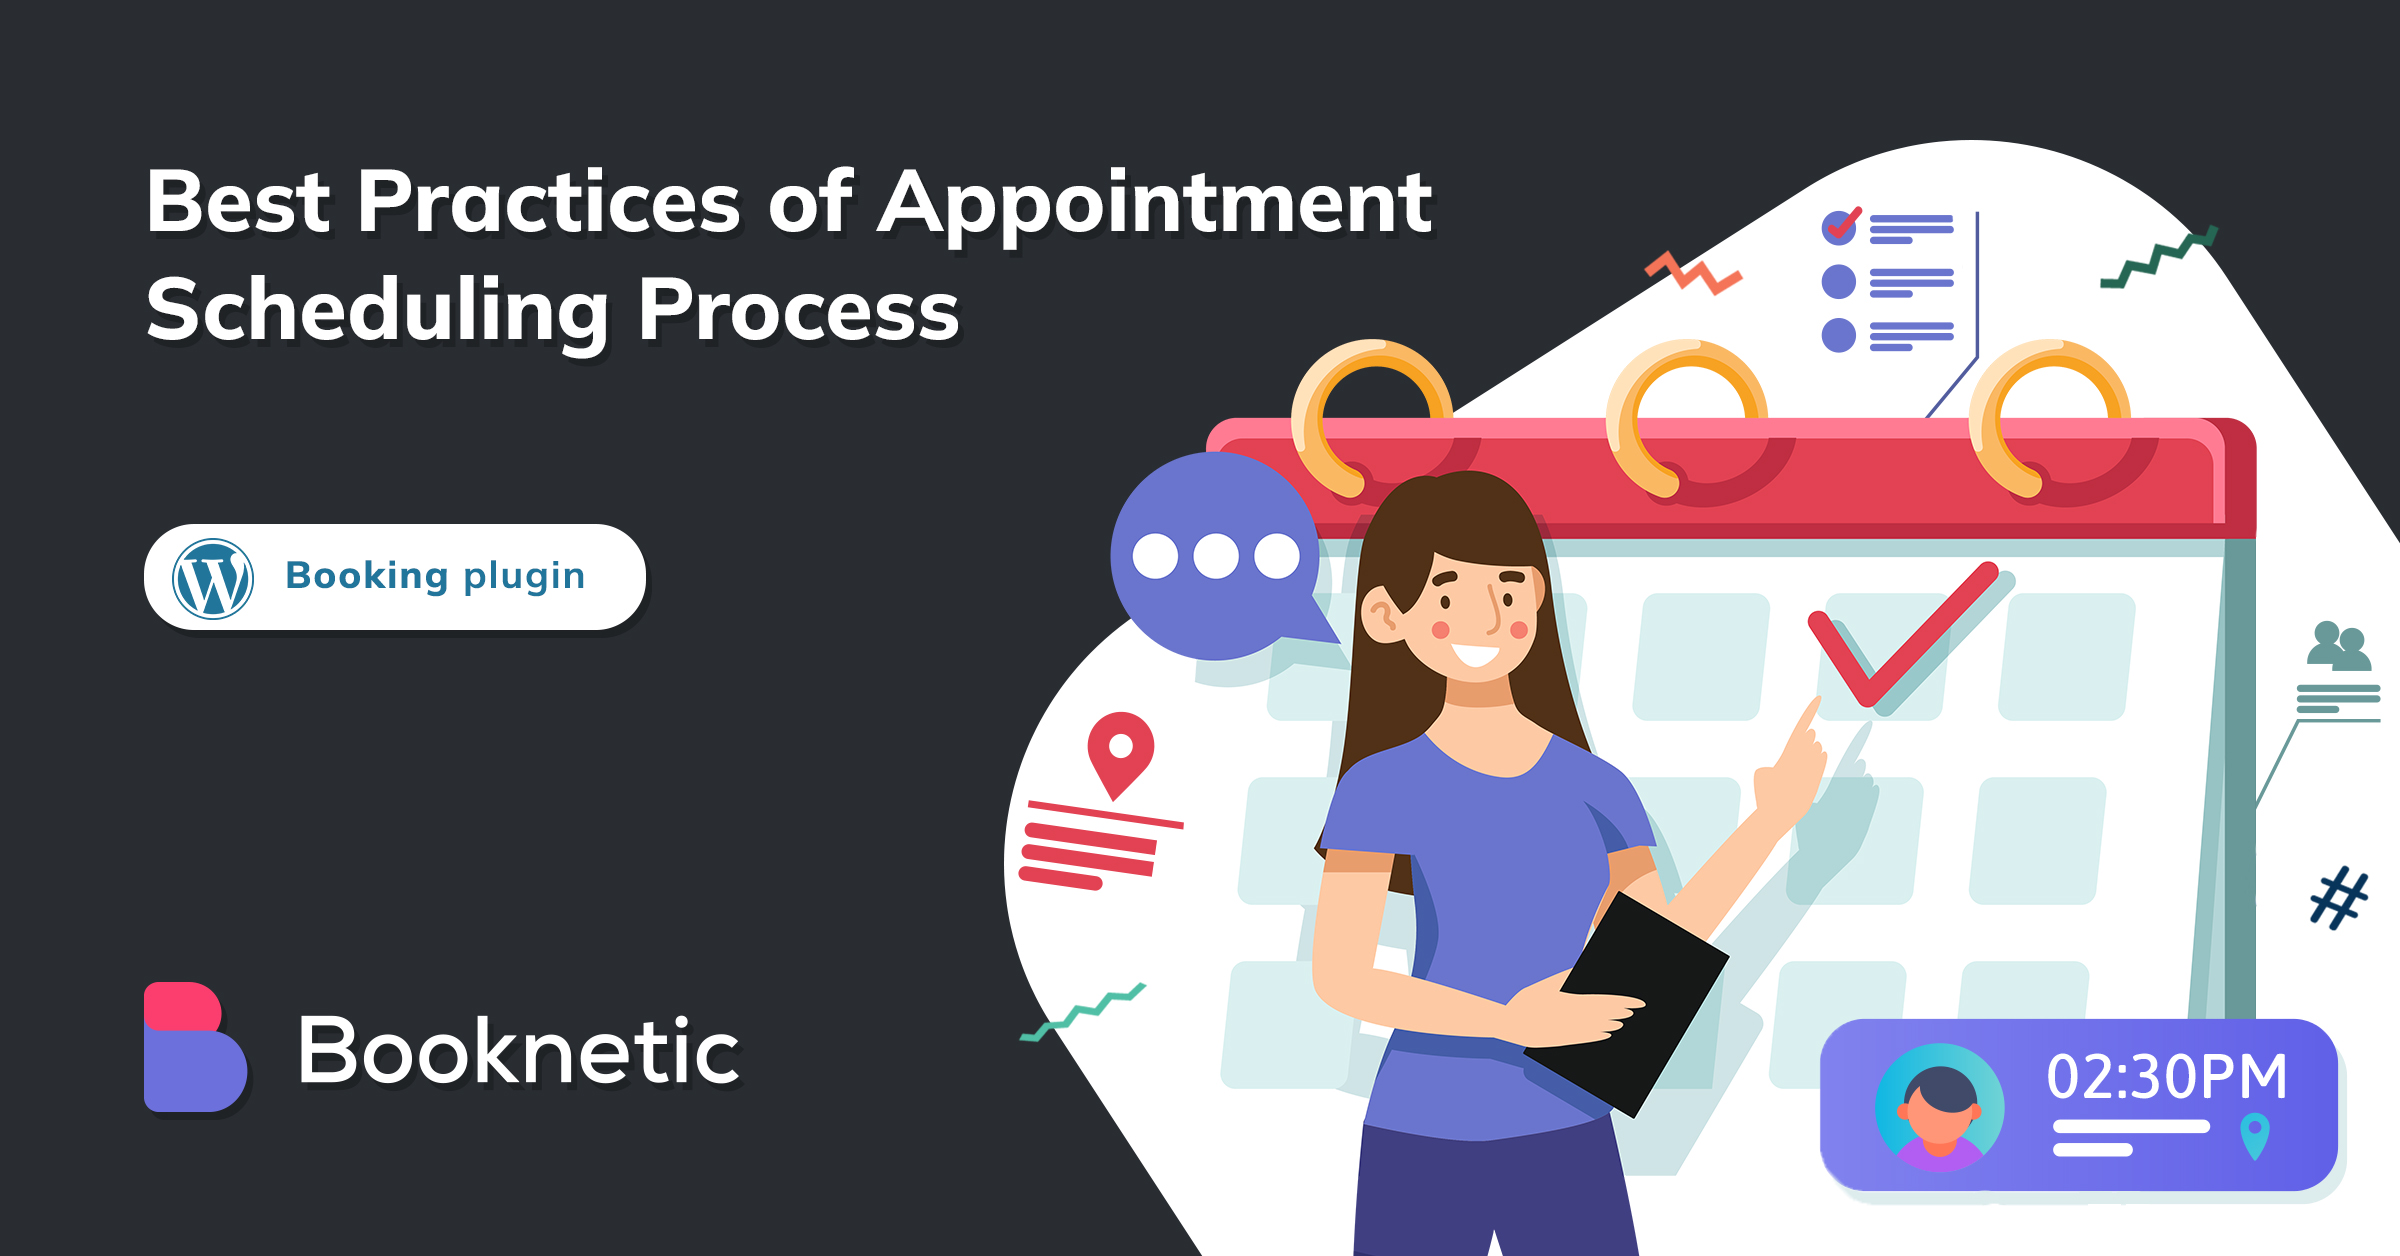 The Best Practices of Appointment Scheduling Process